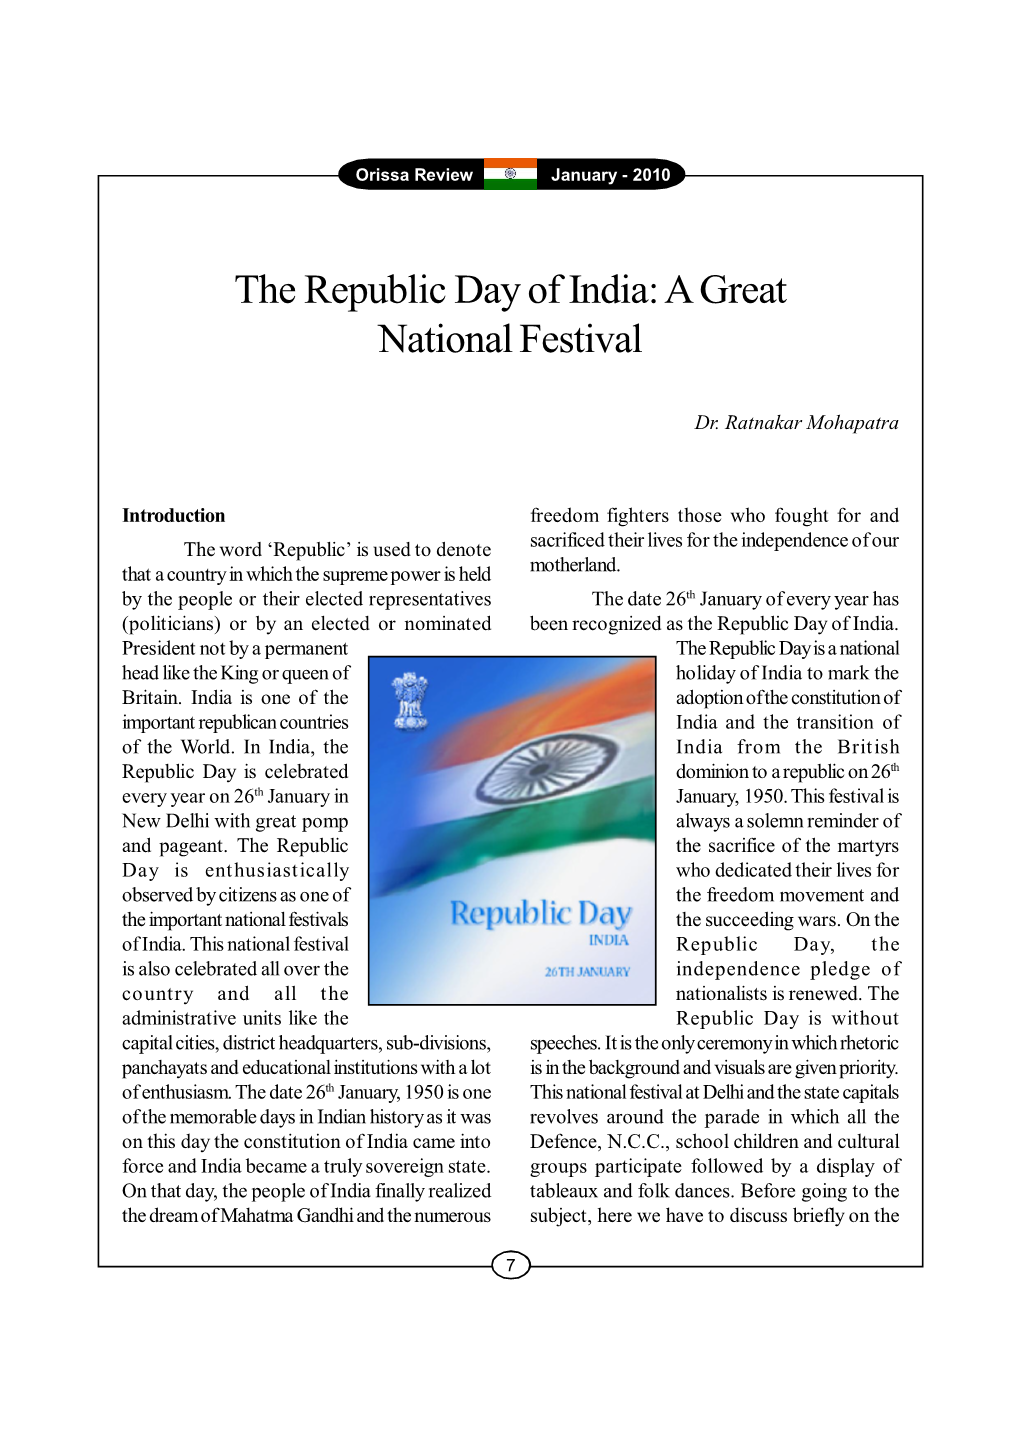 The Republic Day of India: a Great National Festival